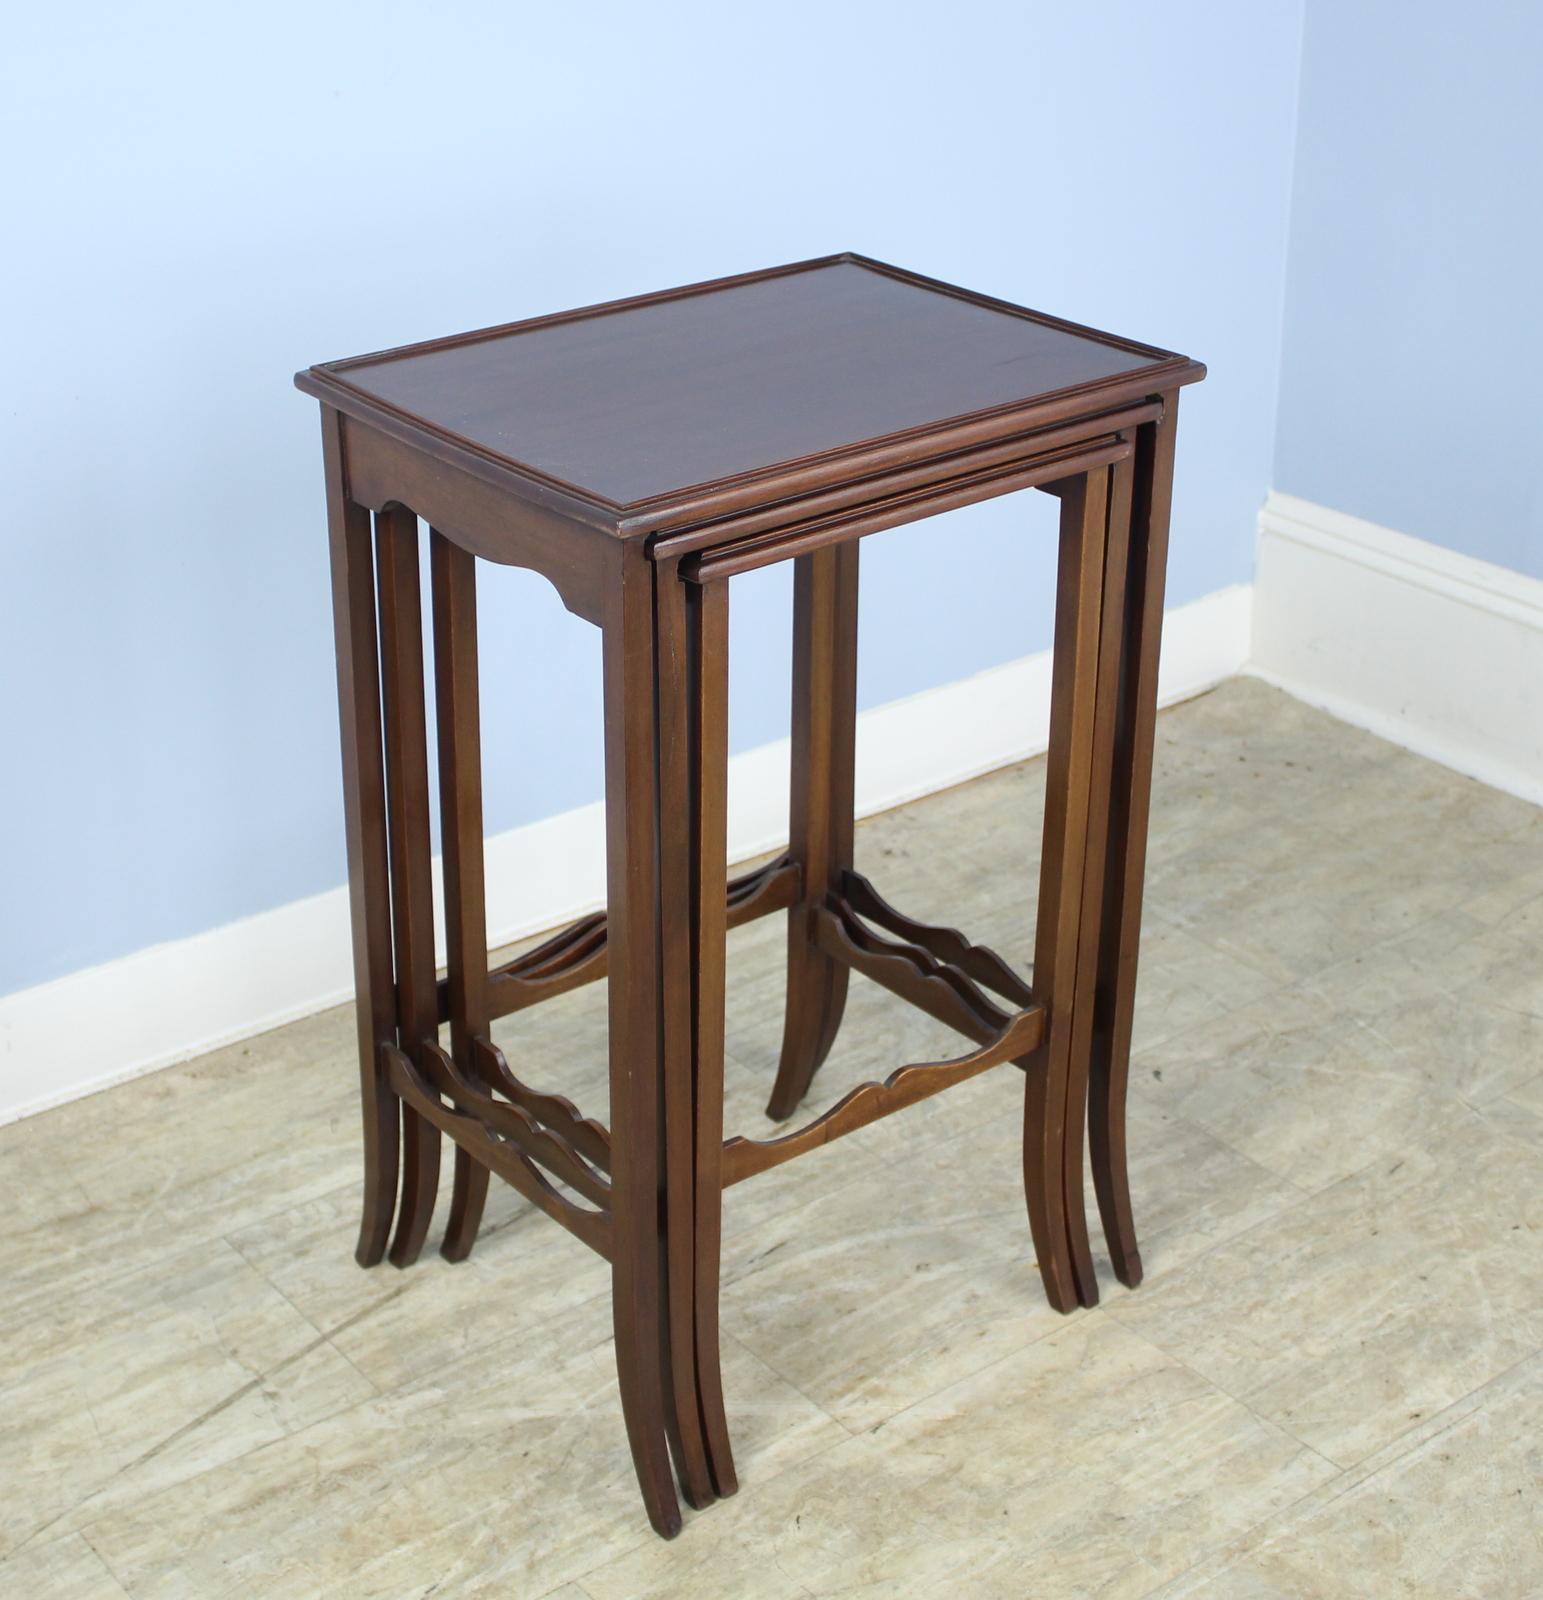 Nest of 3 English Mahogany Tables In Good Condition For Sale In Port Chester, NY